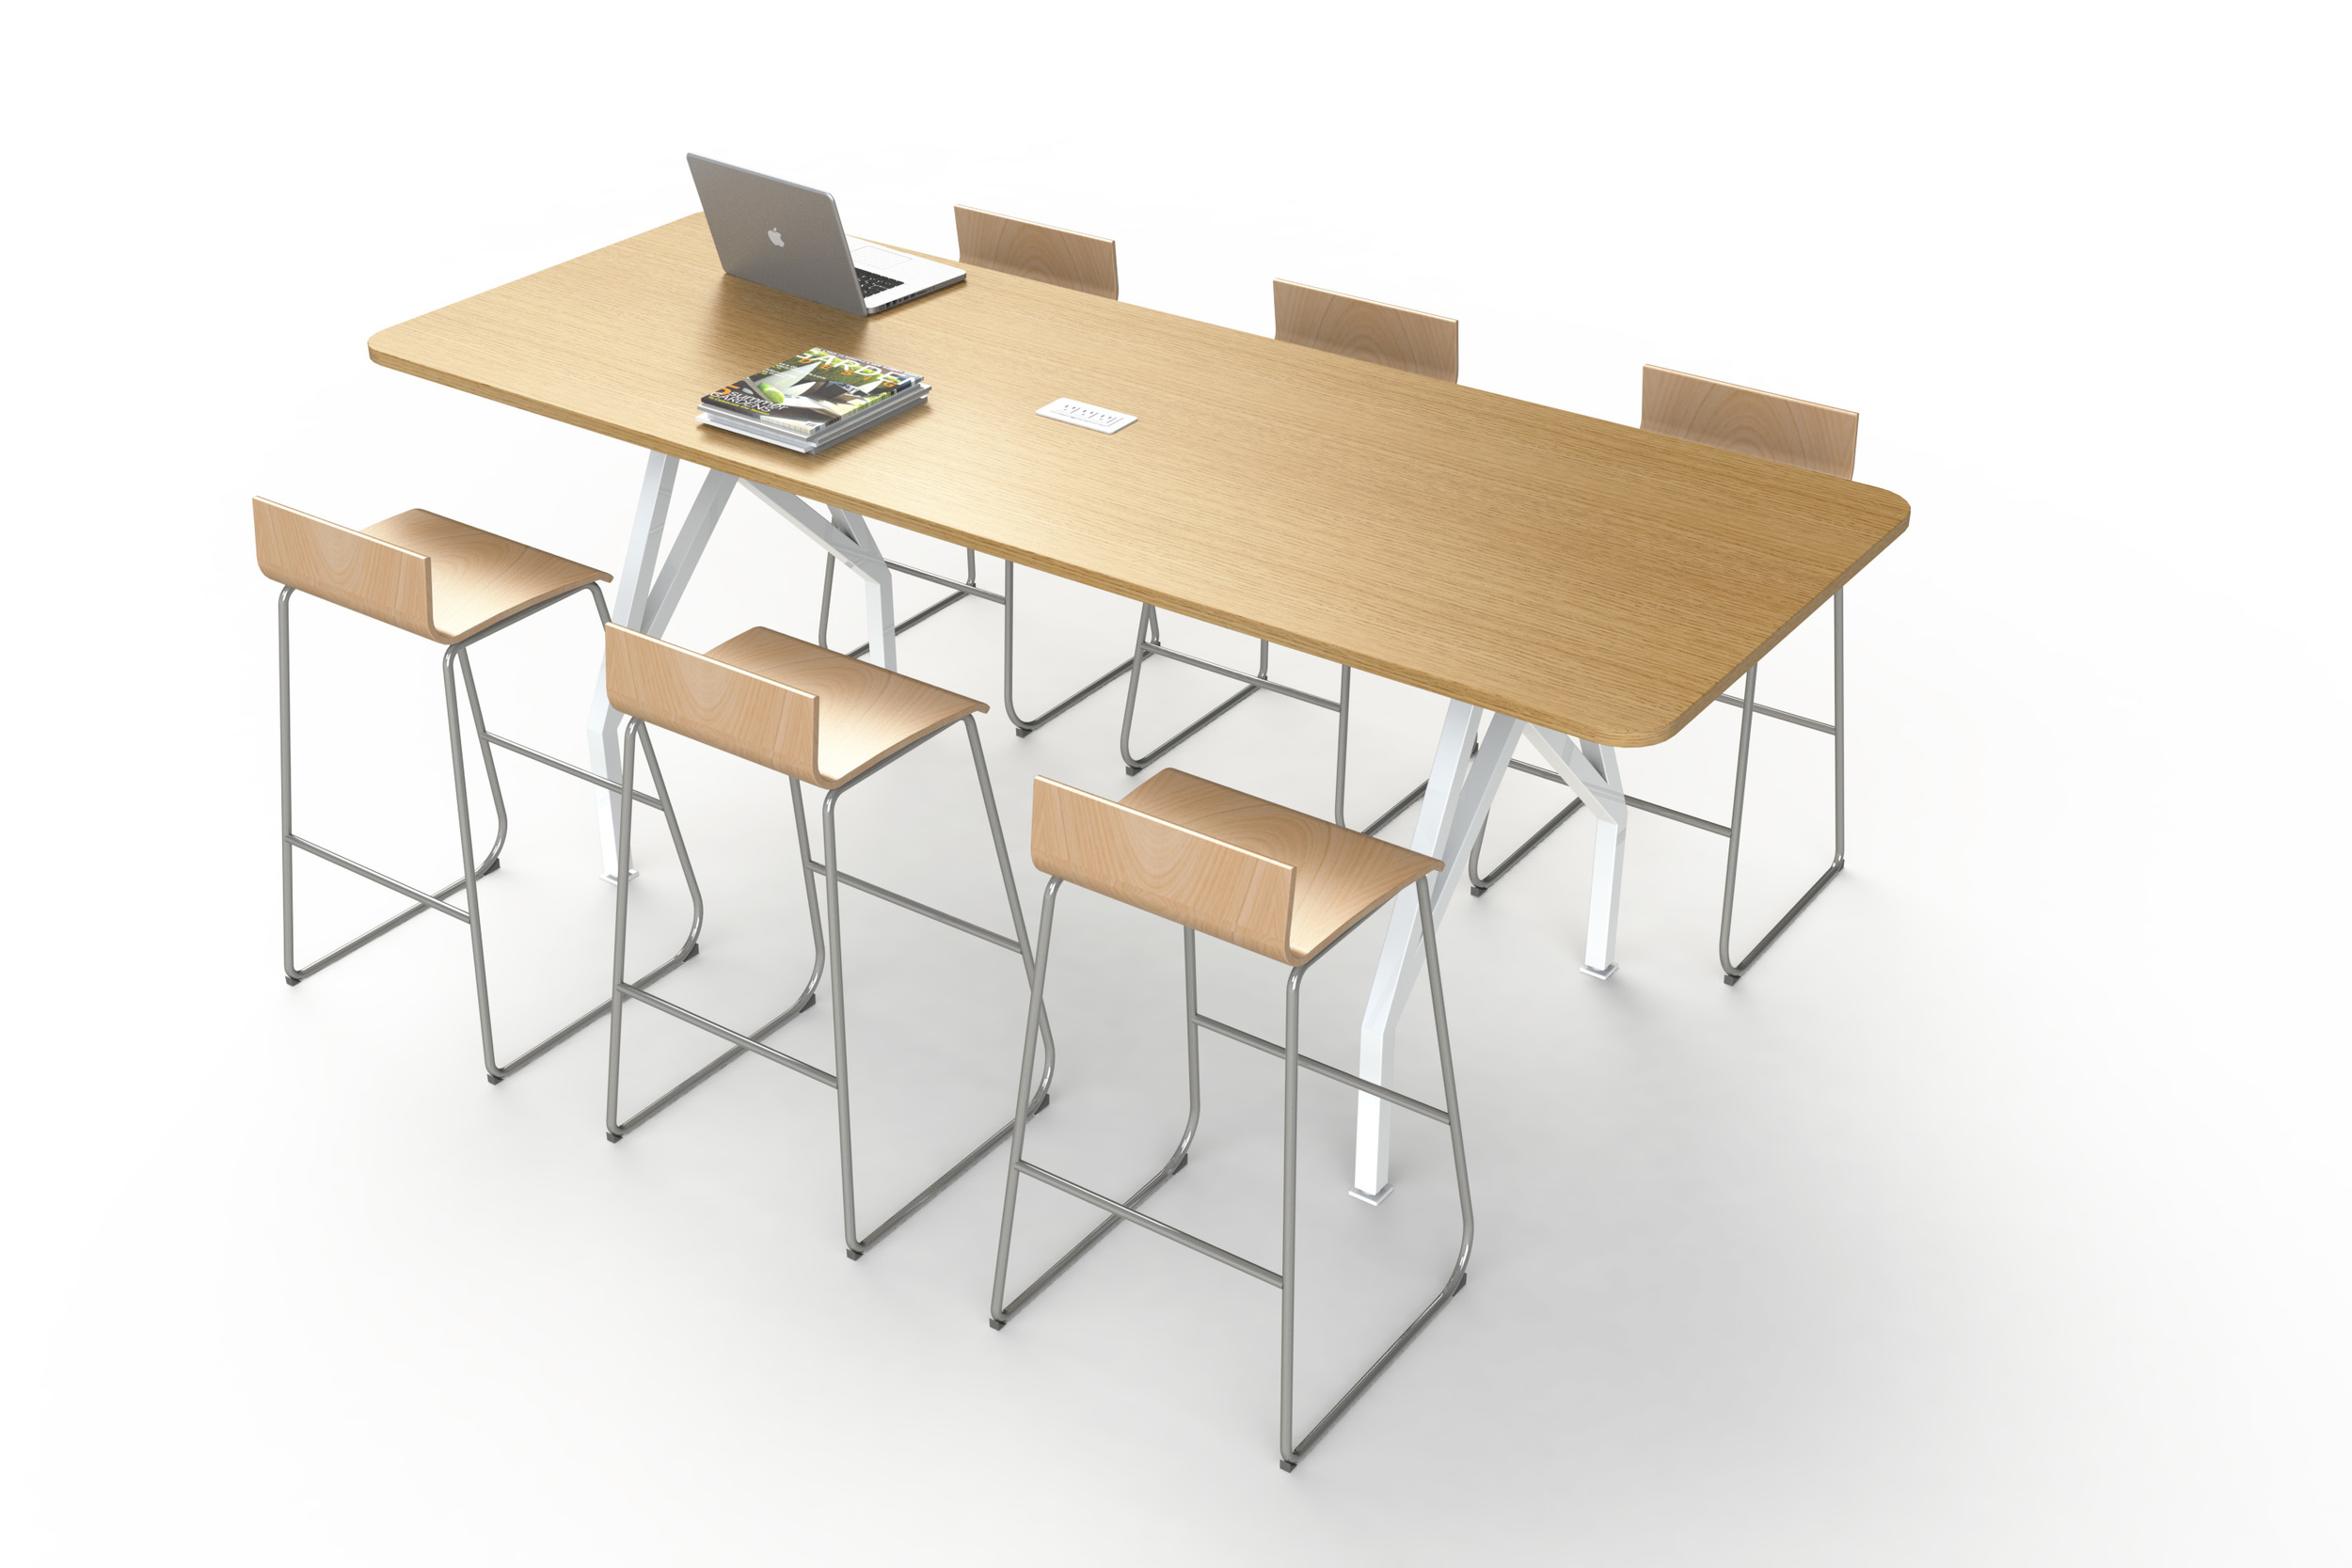 Scale 1:1's Hot Spot Conference Table